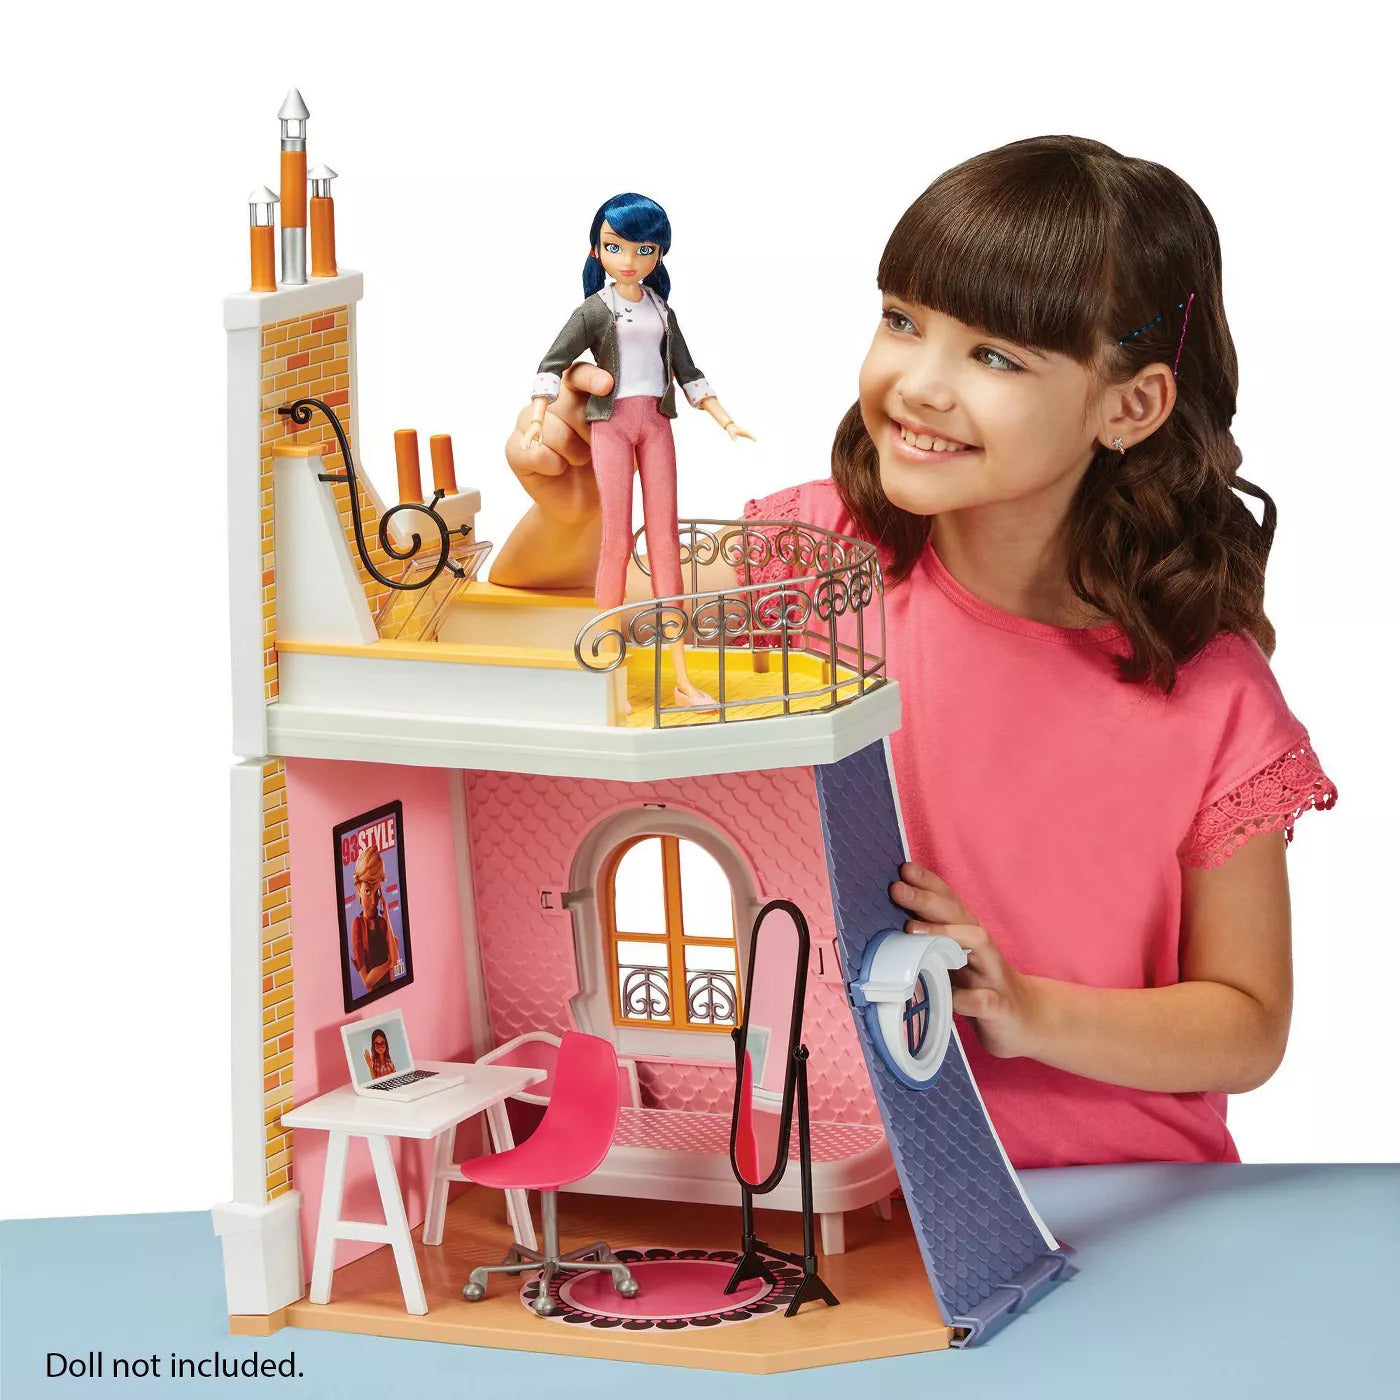 Miraculous - Marinettes 2 in 1 Playset